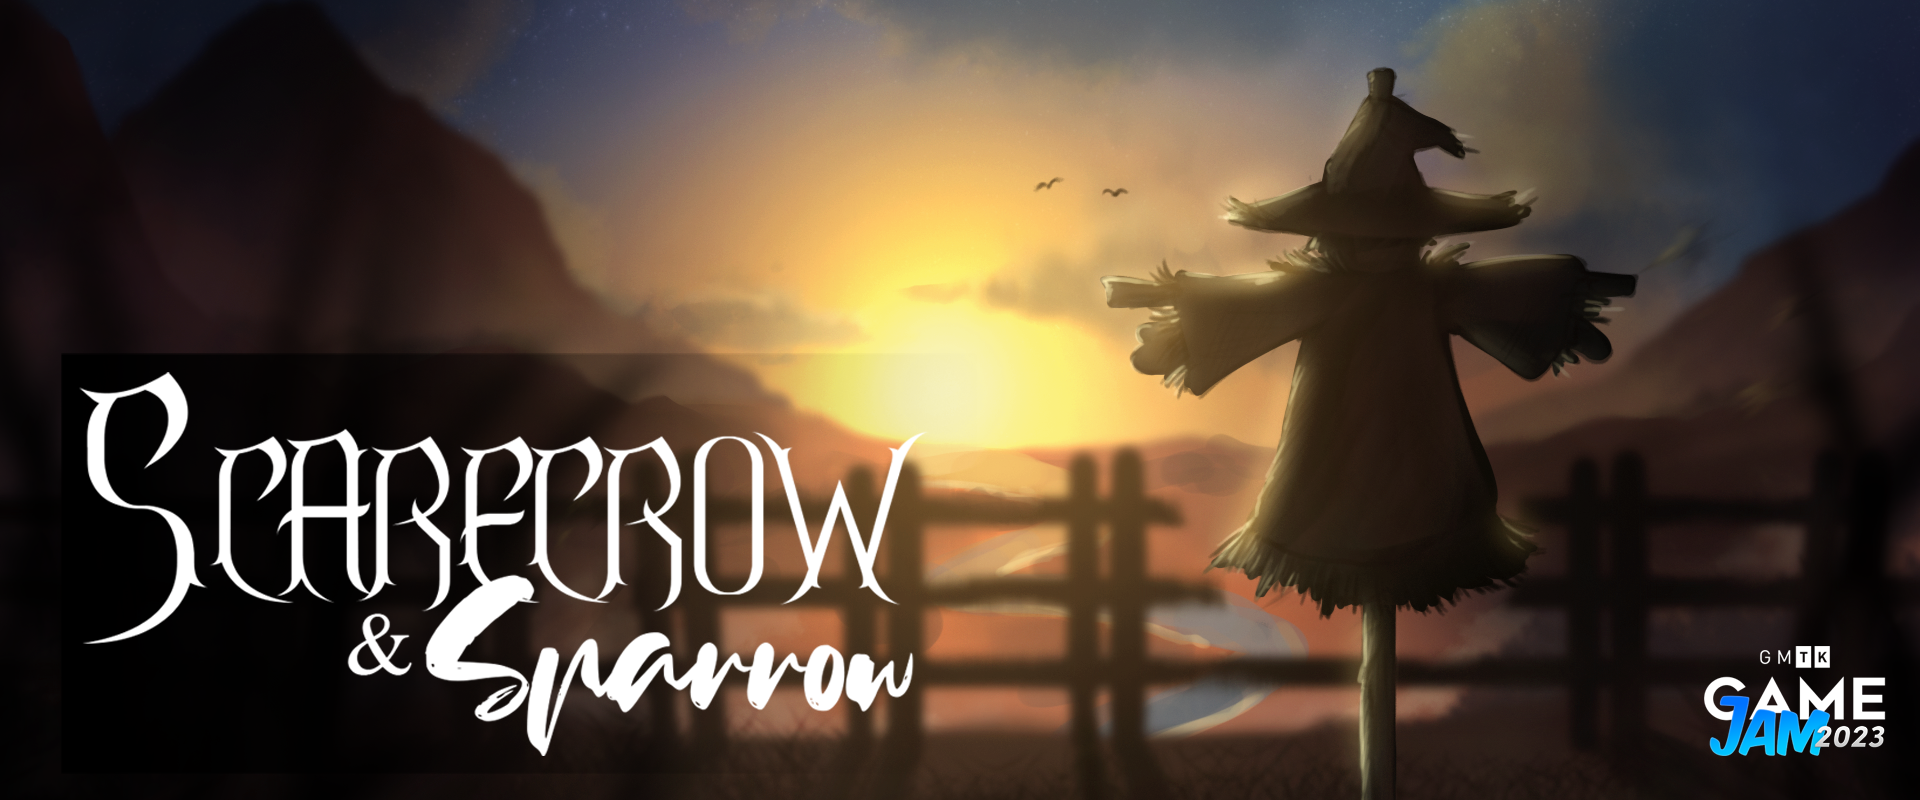 Scarecrow and Sparrow